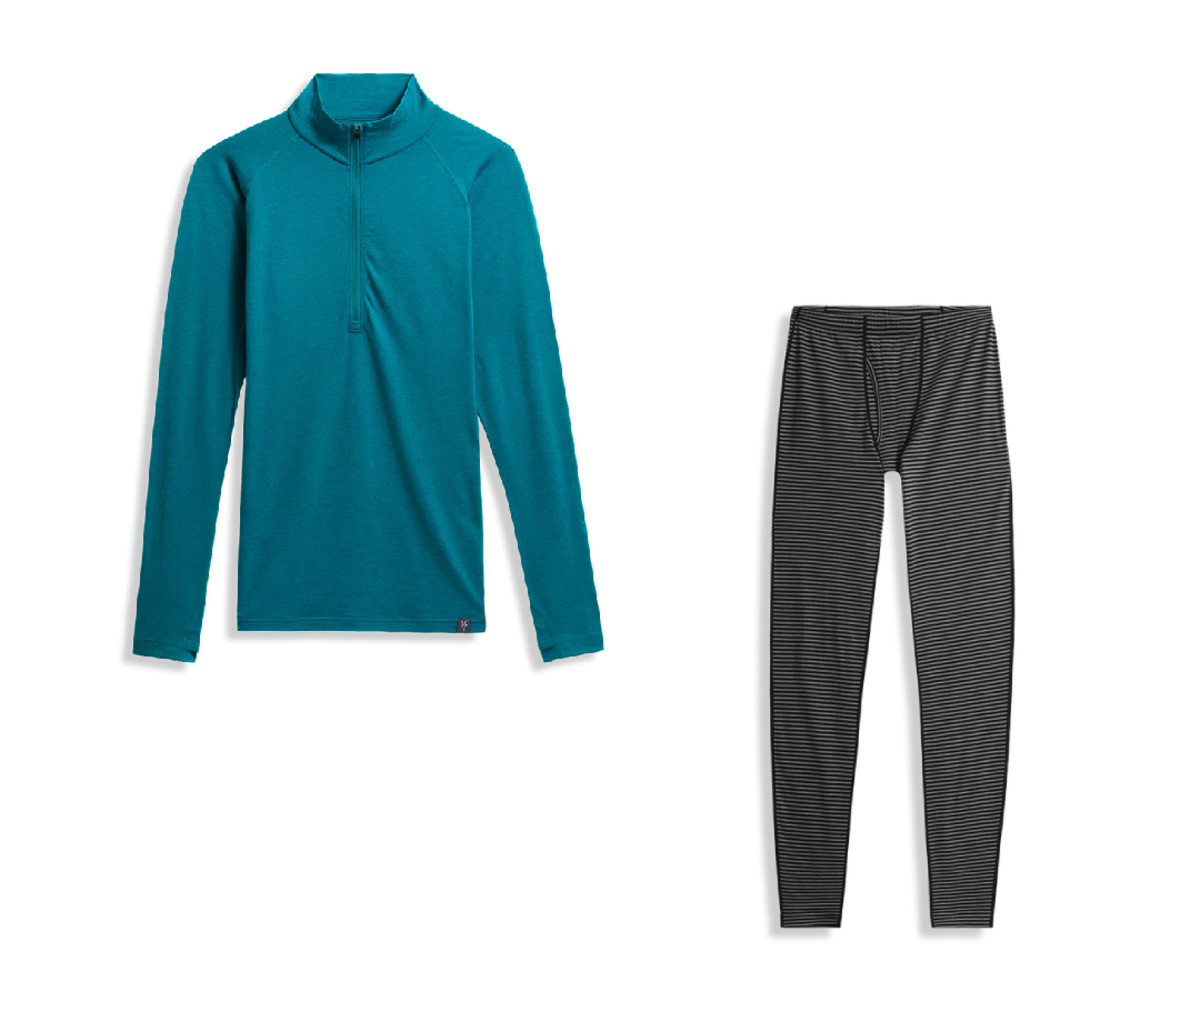 Thermals for men: Stay warm during winter in thermal tops, pants & sets